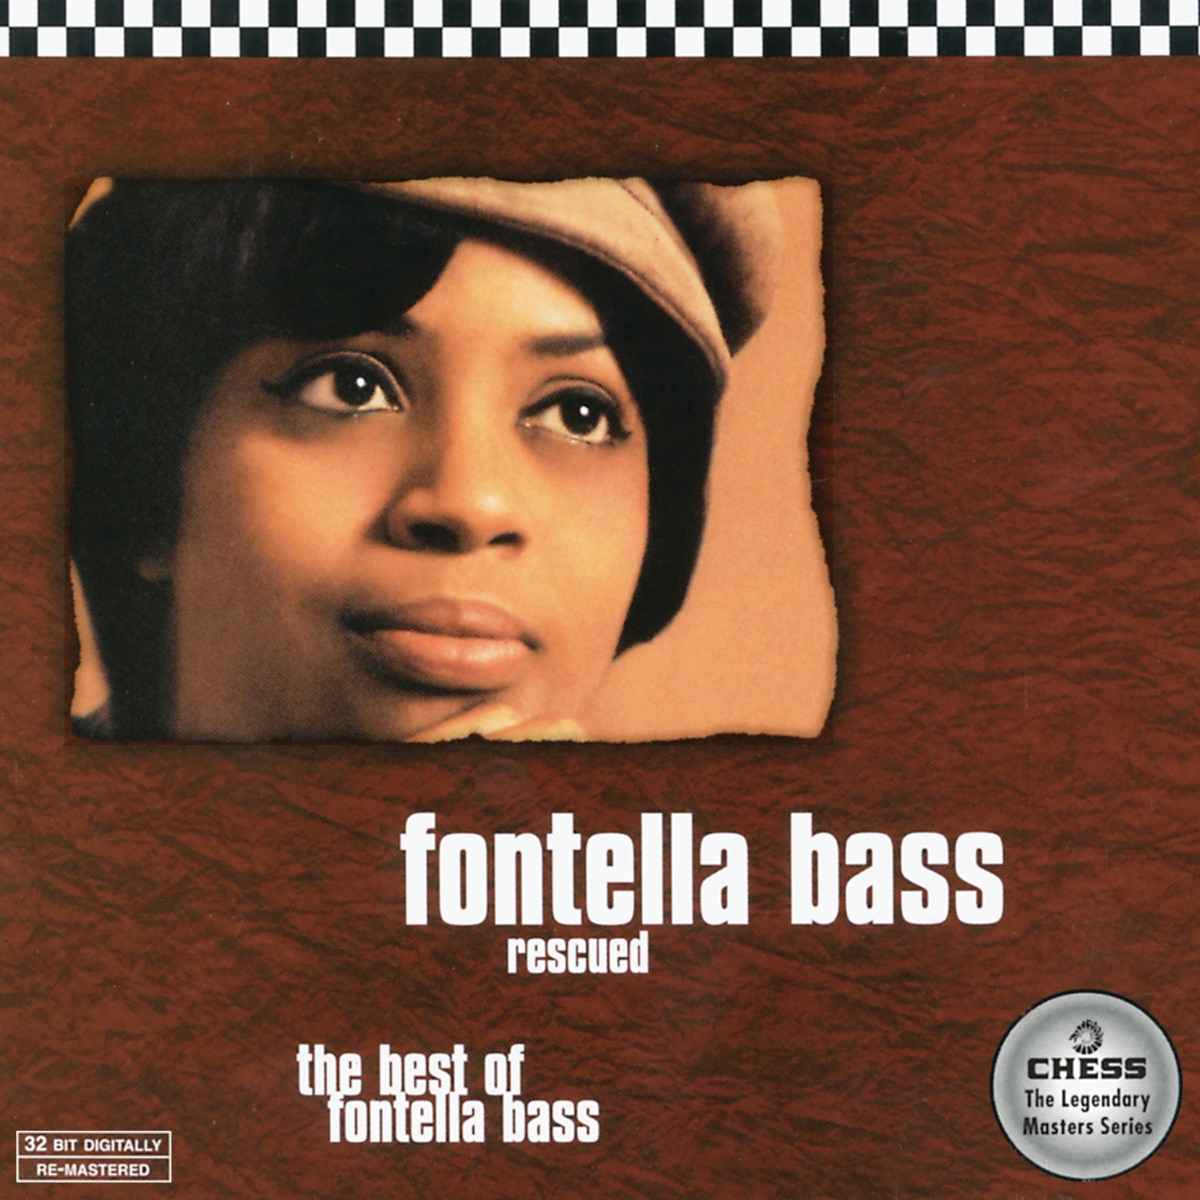 Rescued: The Best of Fontella Bass - Album by Fontella Bass - Apple Music